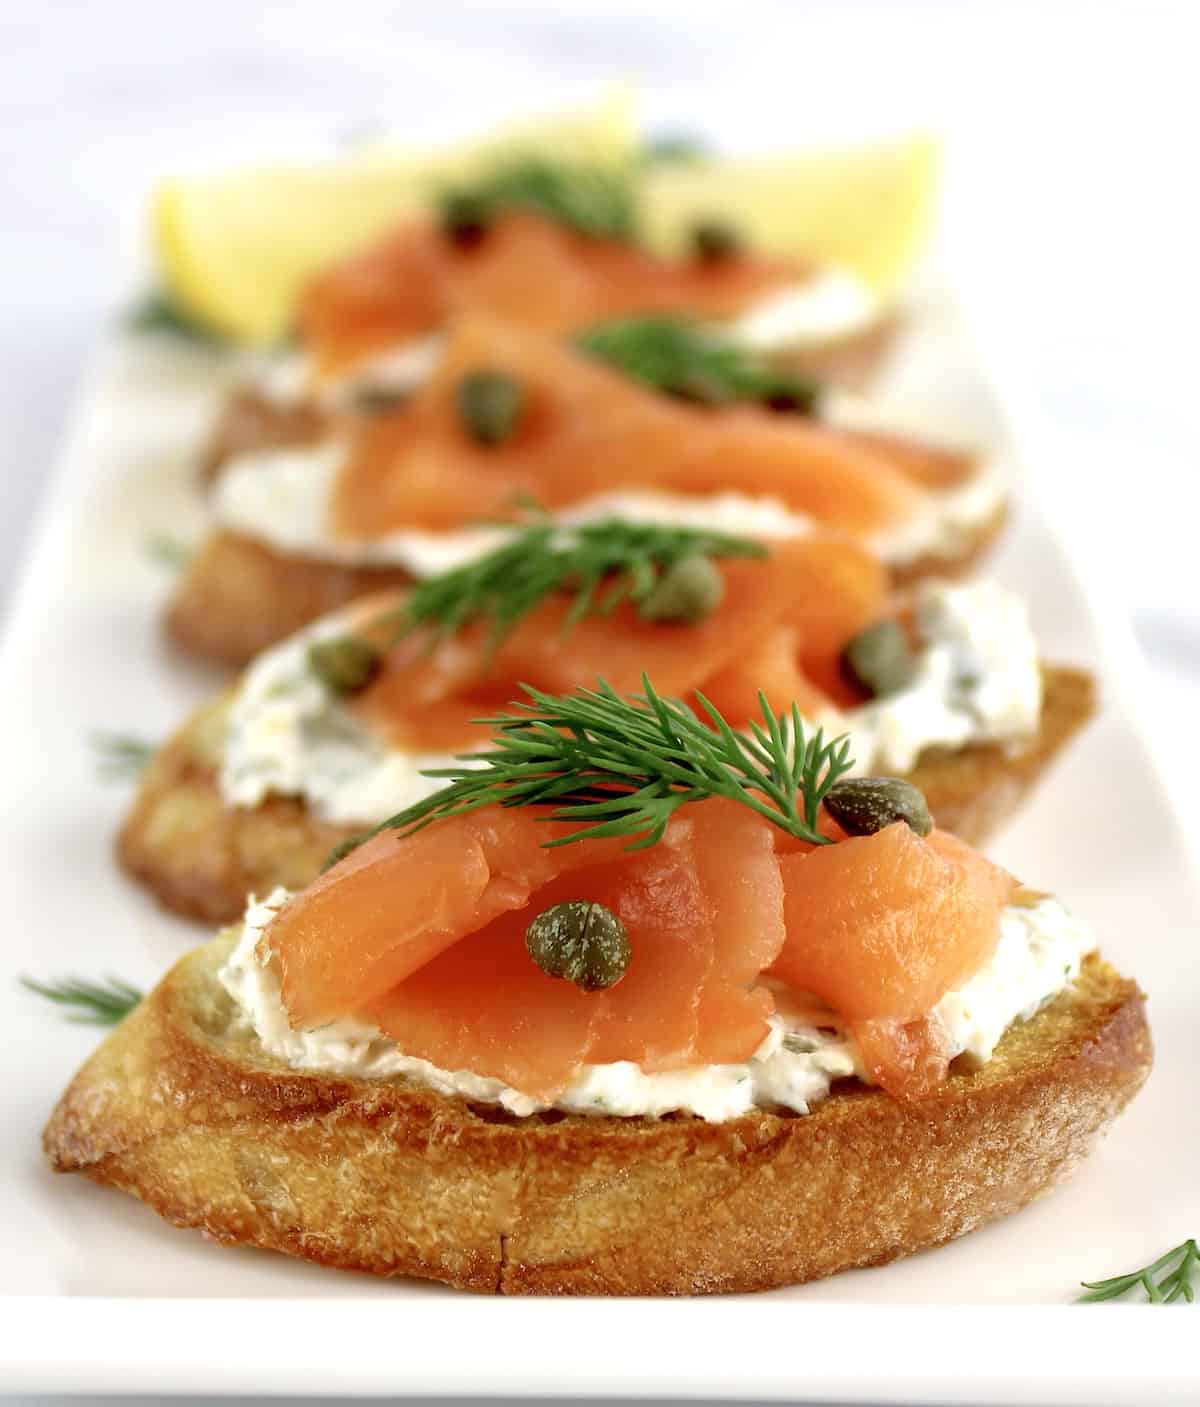 4 pieces of Smoked Salmon and Goat Cheese Crostini on white plate in a row